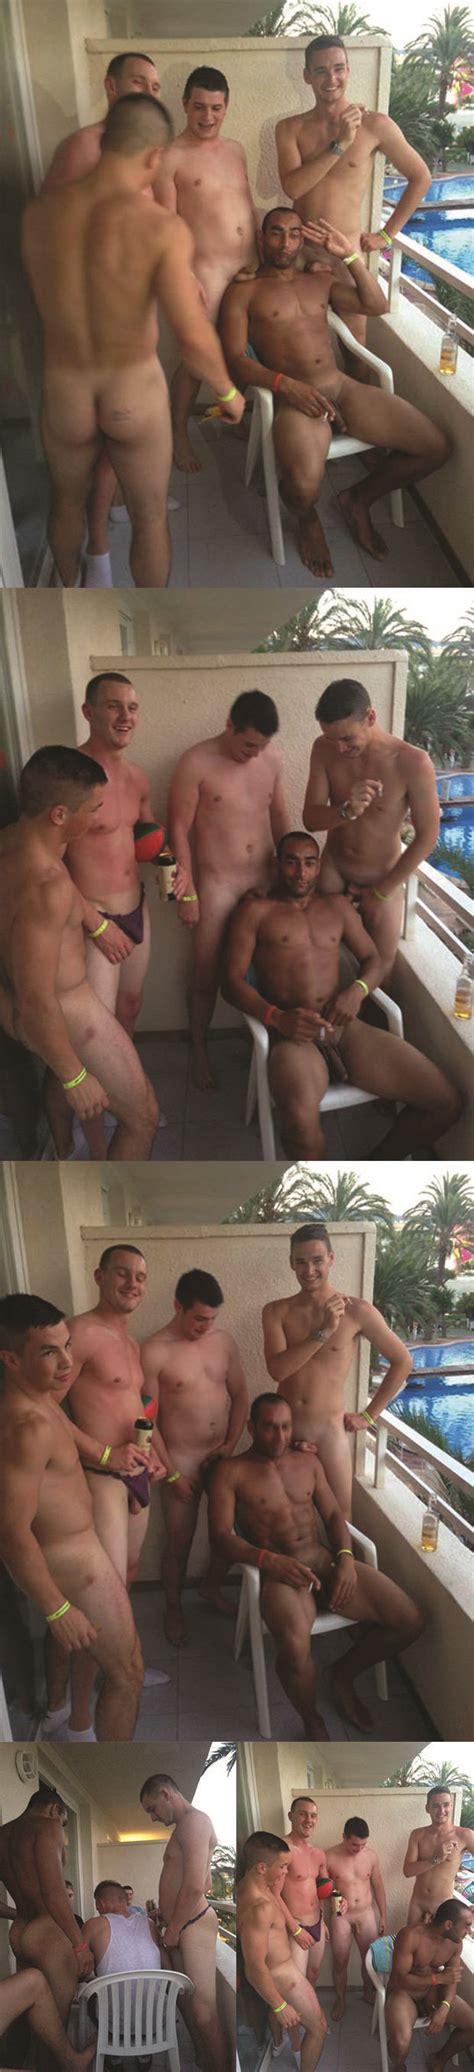 Naked Straight Guys Playing With Their Dicks